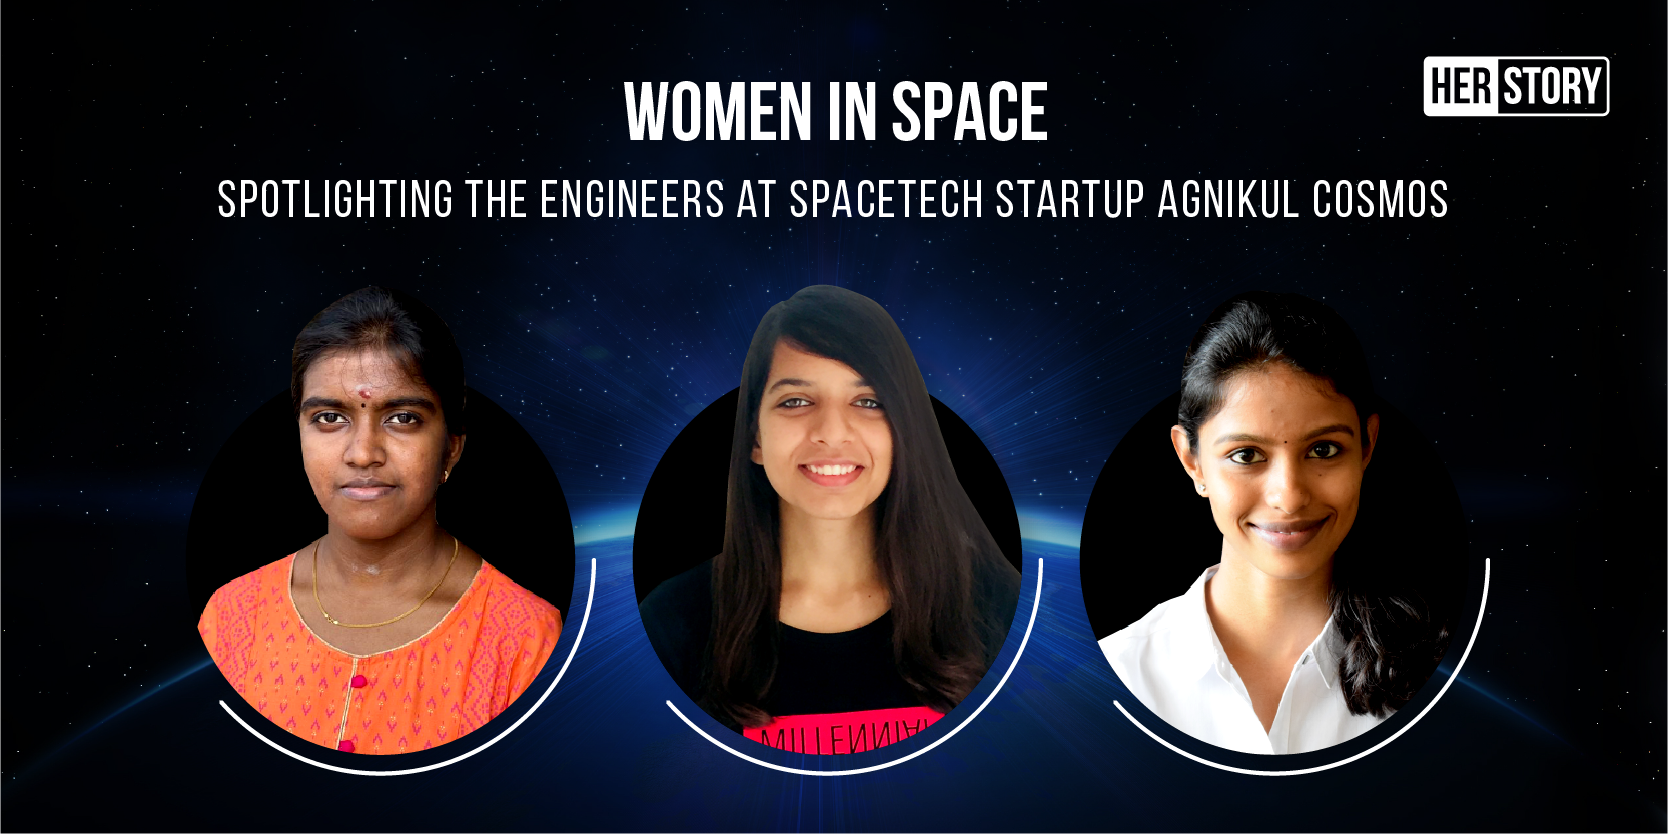 [HS Pioneers] These 3 women from spacetech startup Agnikul Cosmos are powering India’s space race